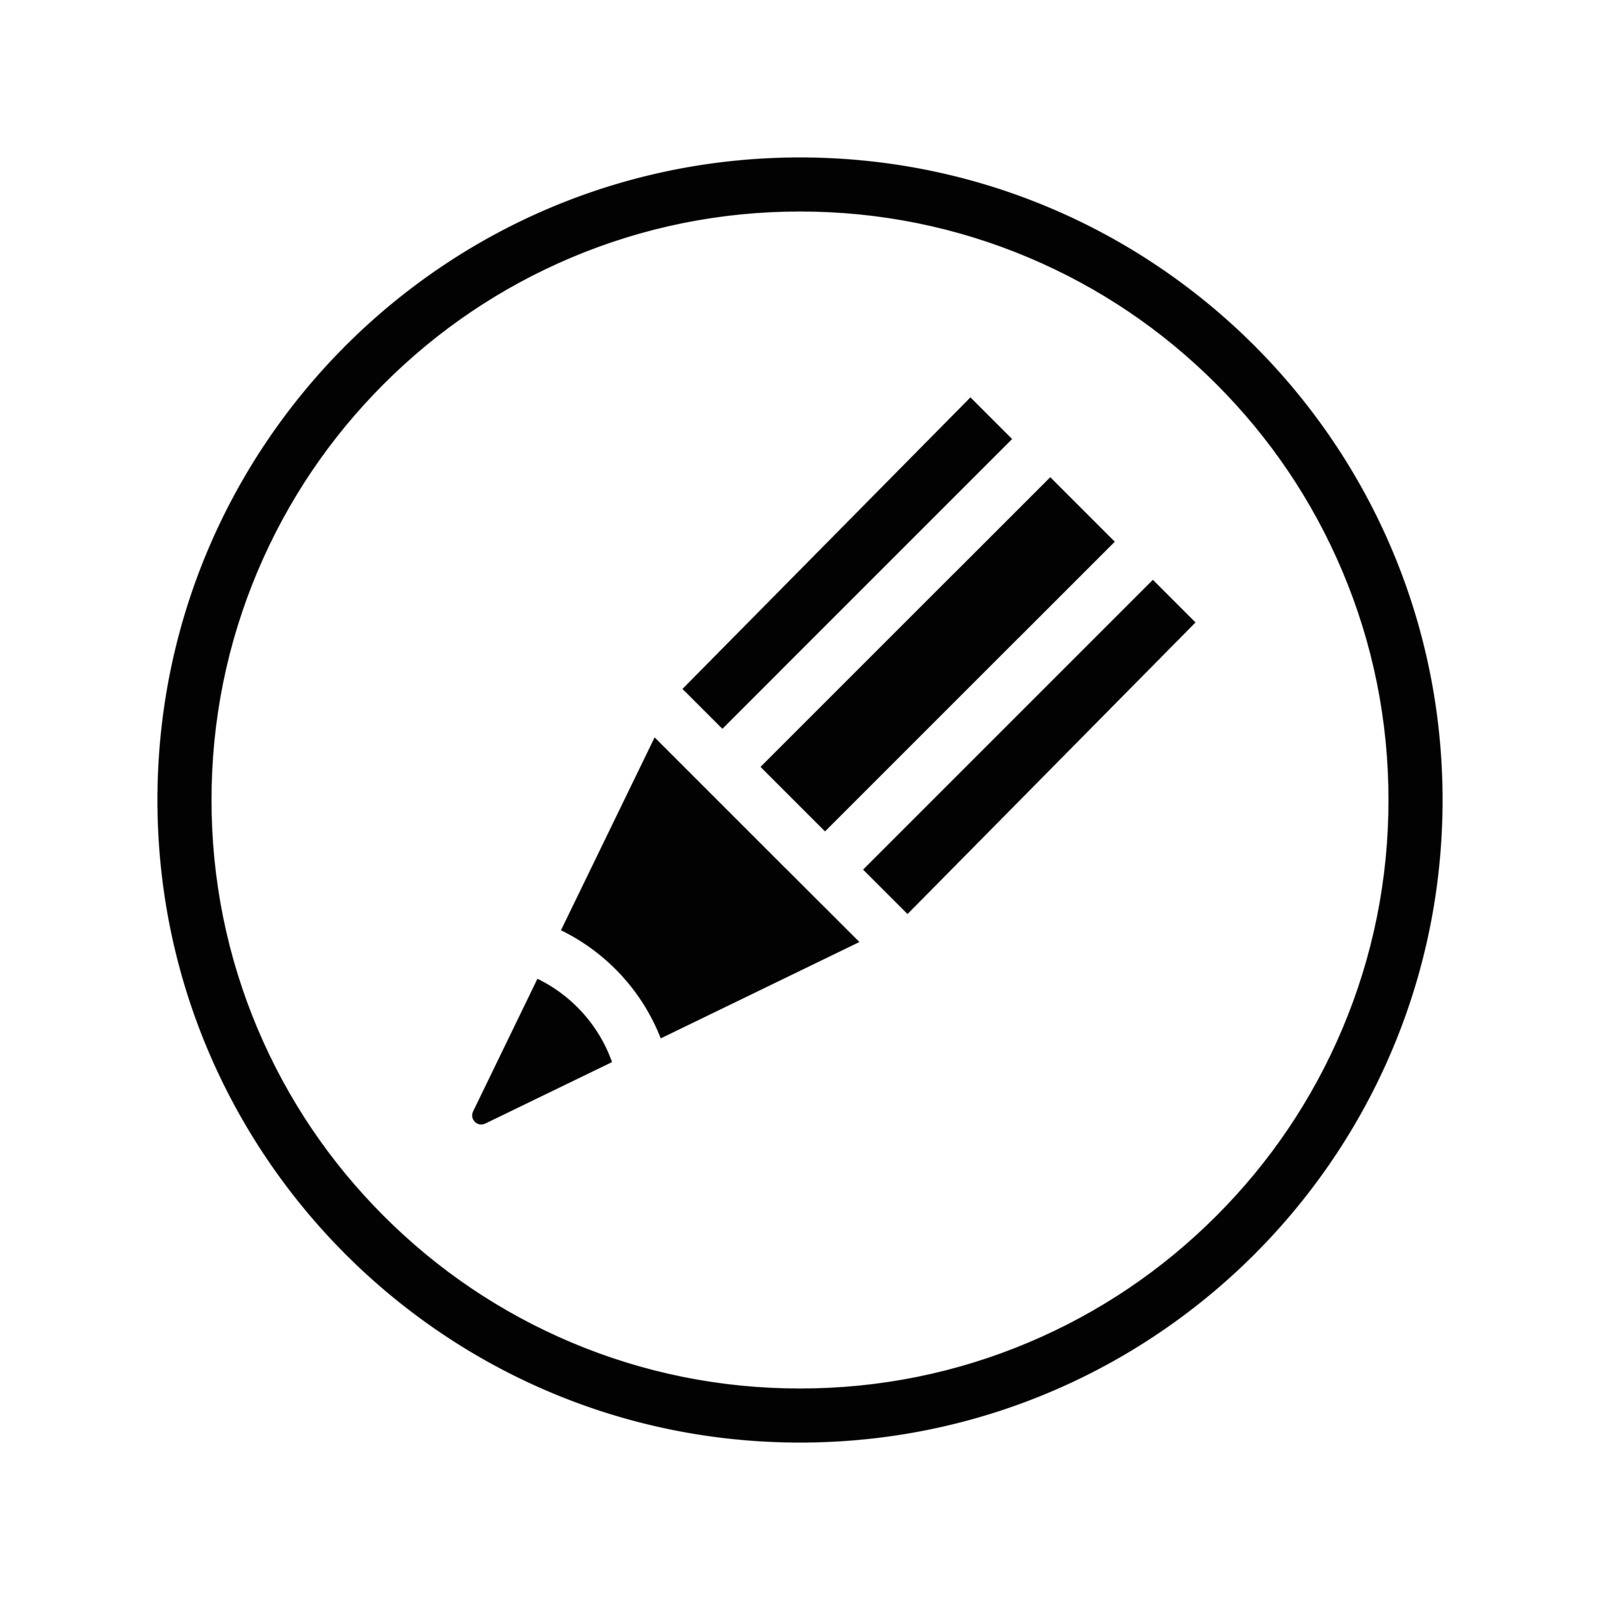 Pencil icon, iconic symbol inside a circle, on white background. Vector Iconic Design.
